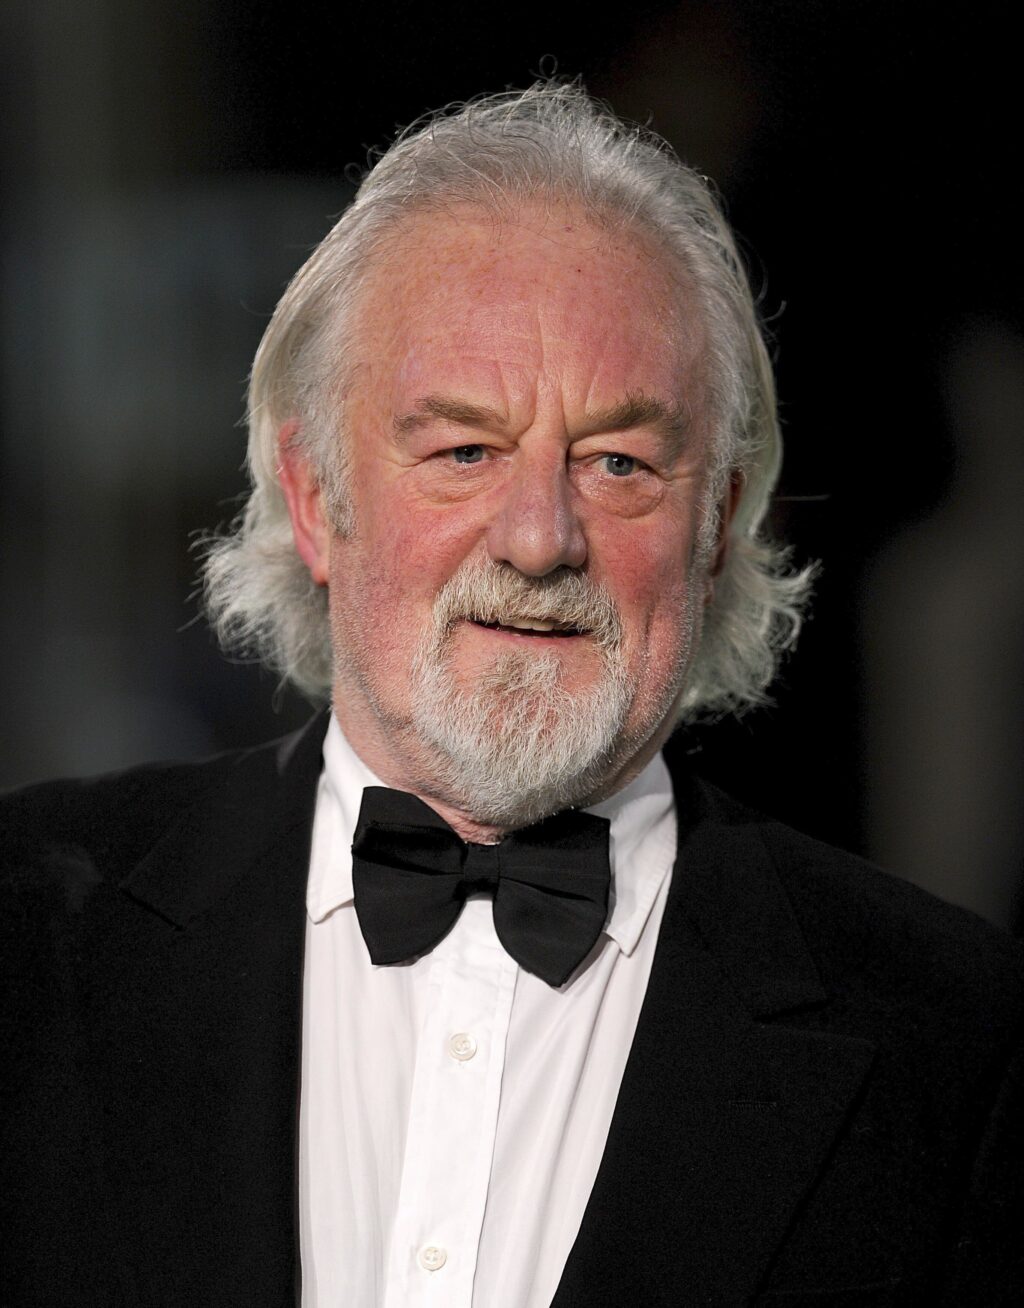 ‘lord of the rings’ actor, bernard hill, has died at 79